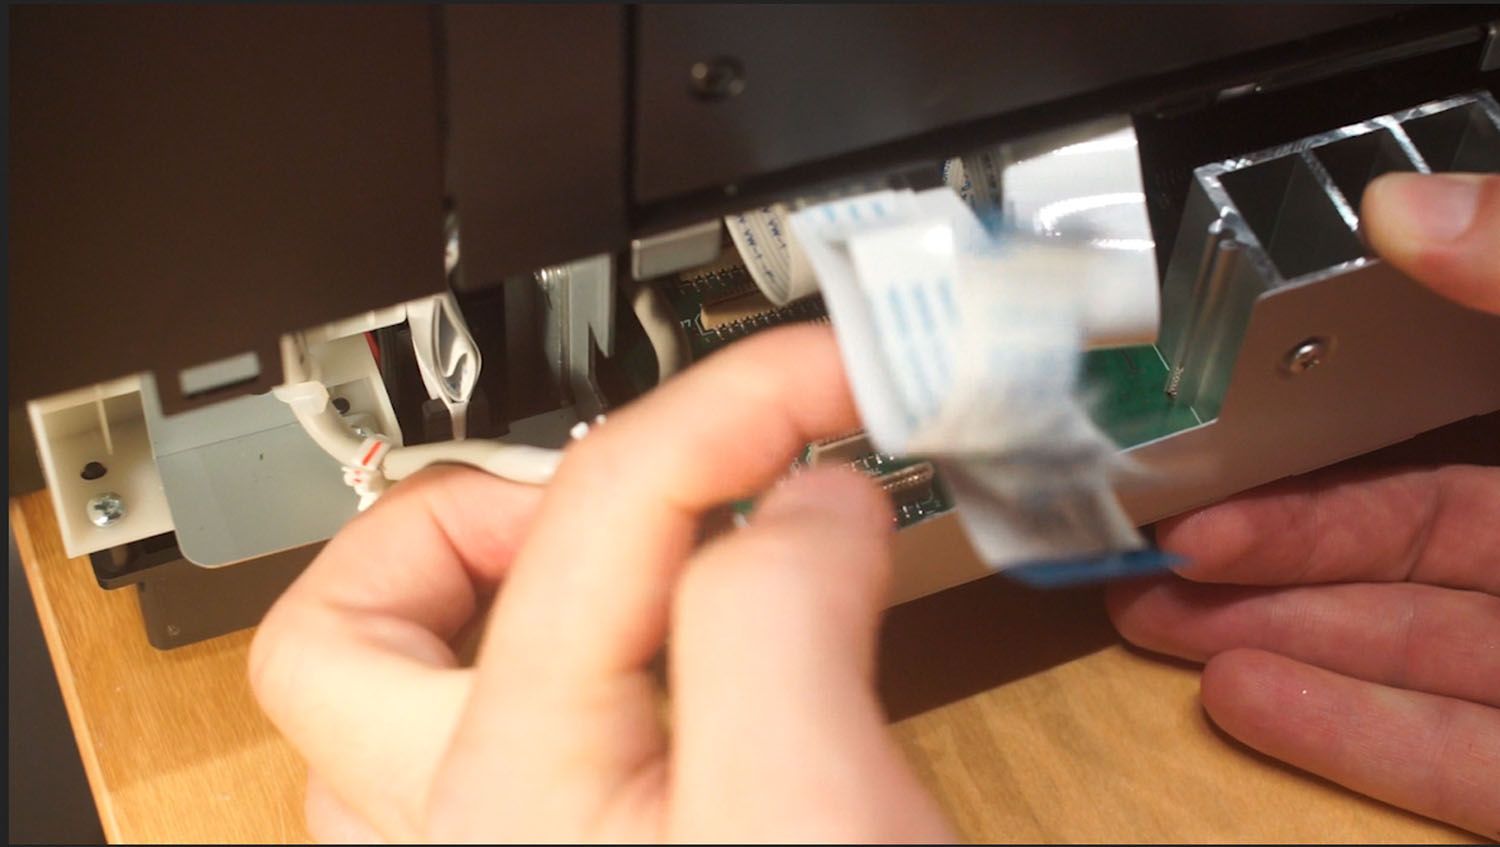 Remove Cables from the Motherboard of the P800 printer